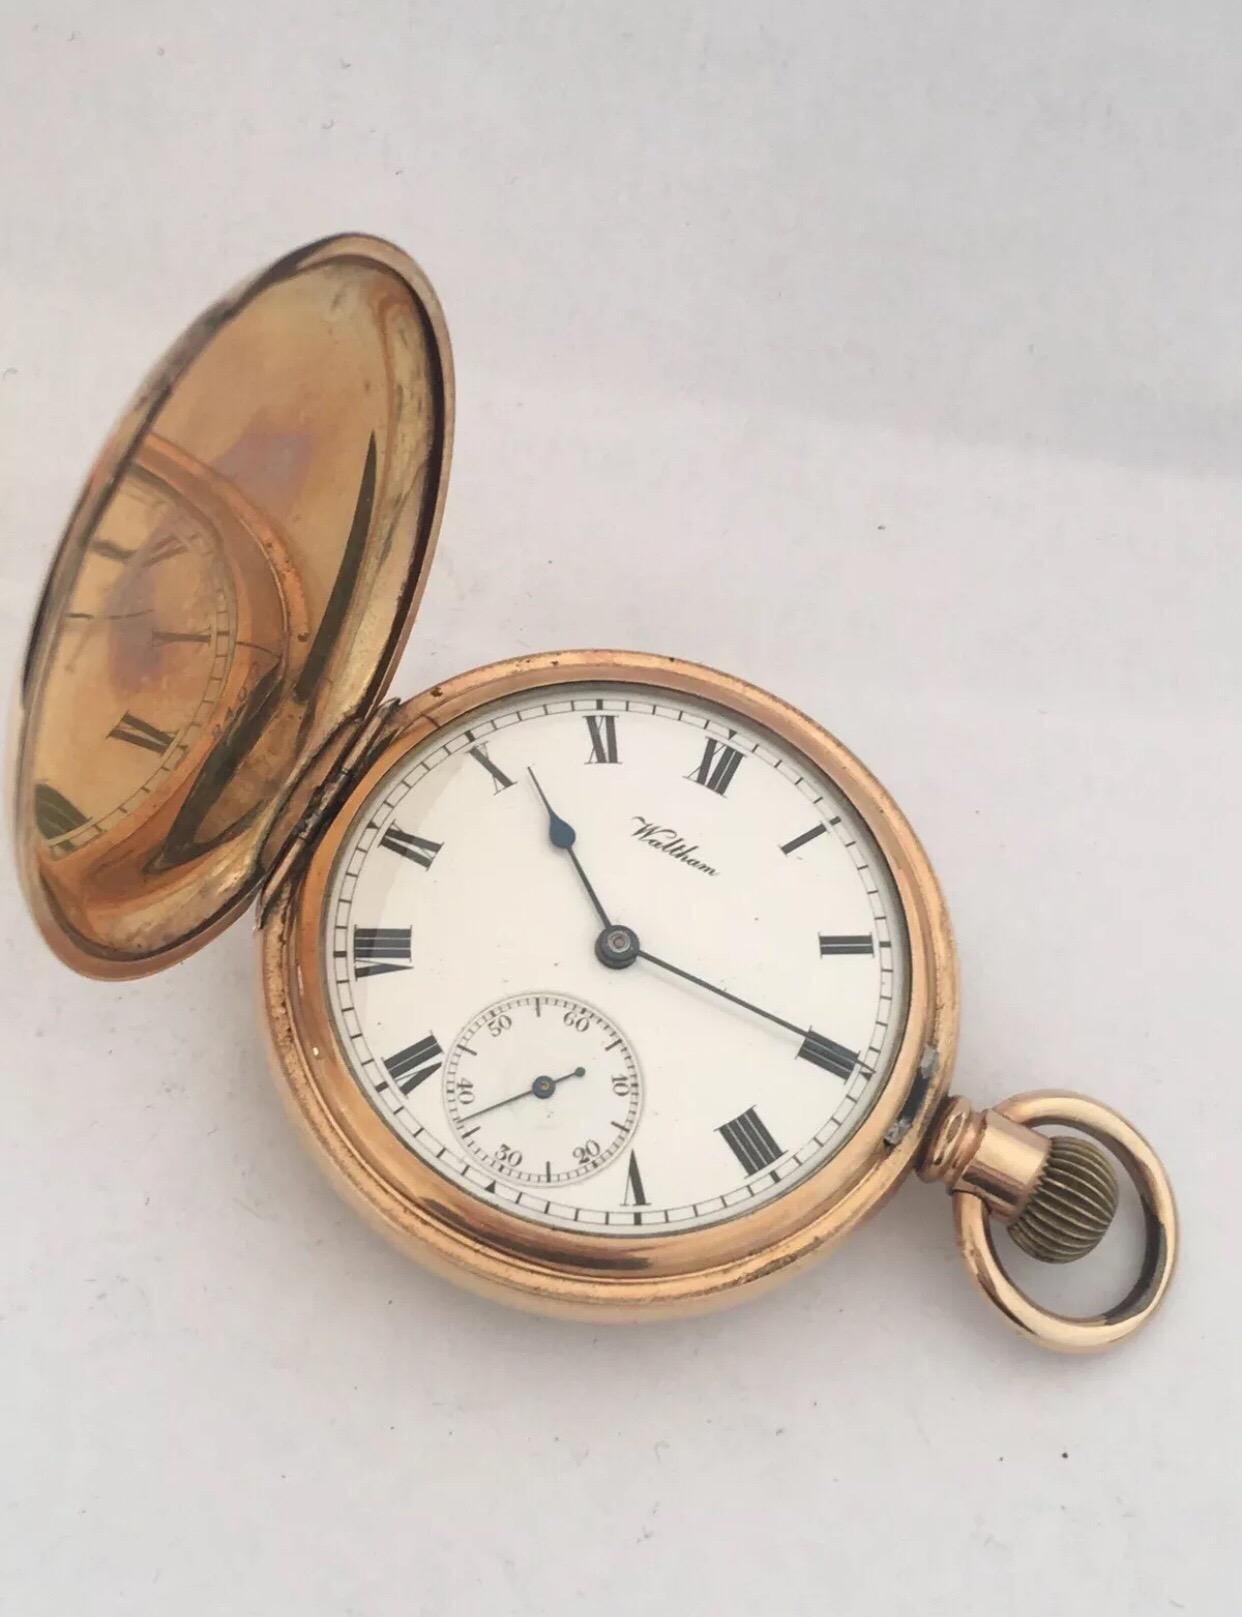 
This beautiful watch is in good working condition and ticking well.